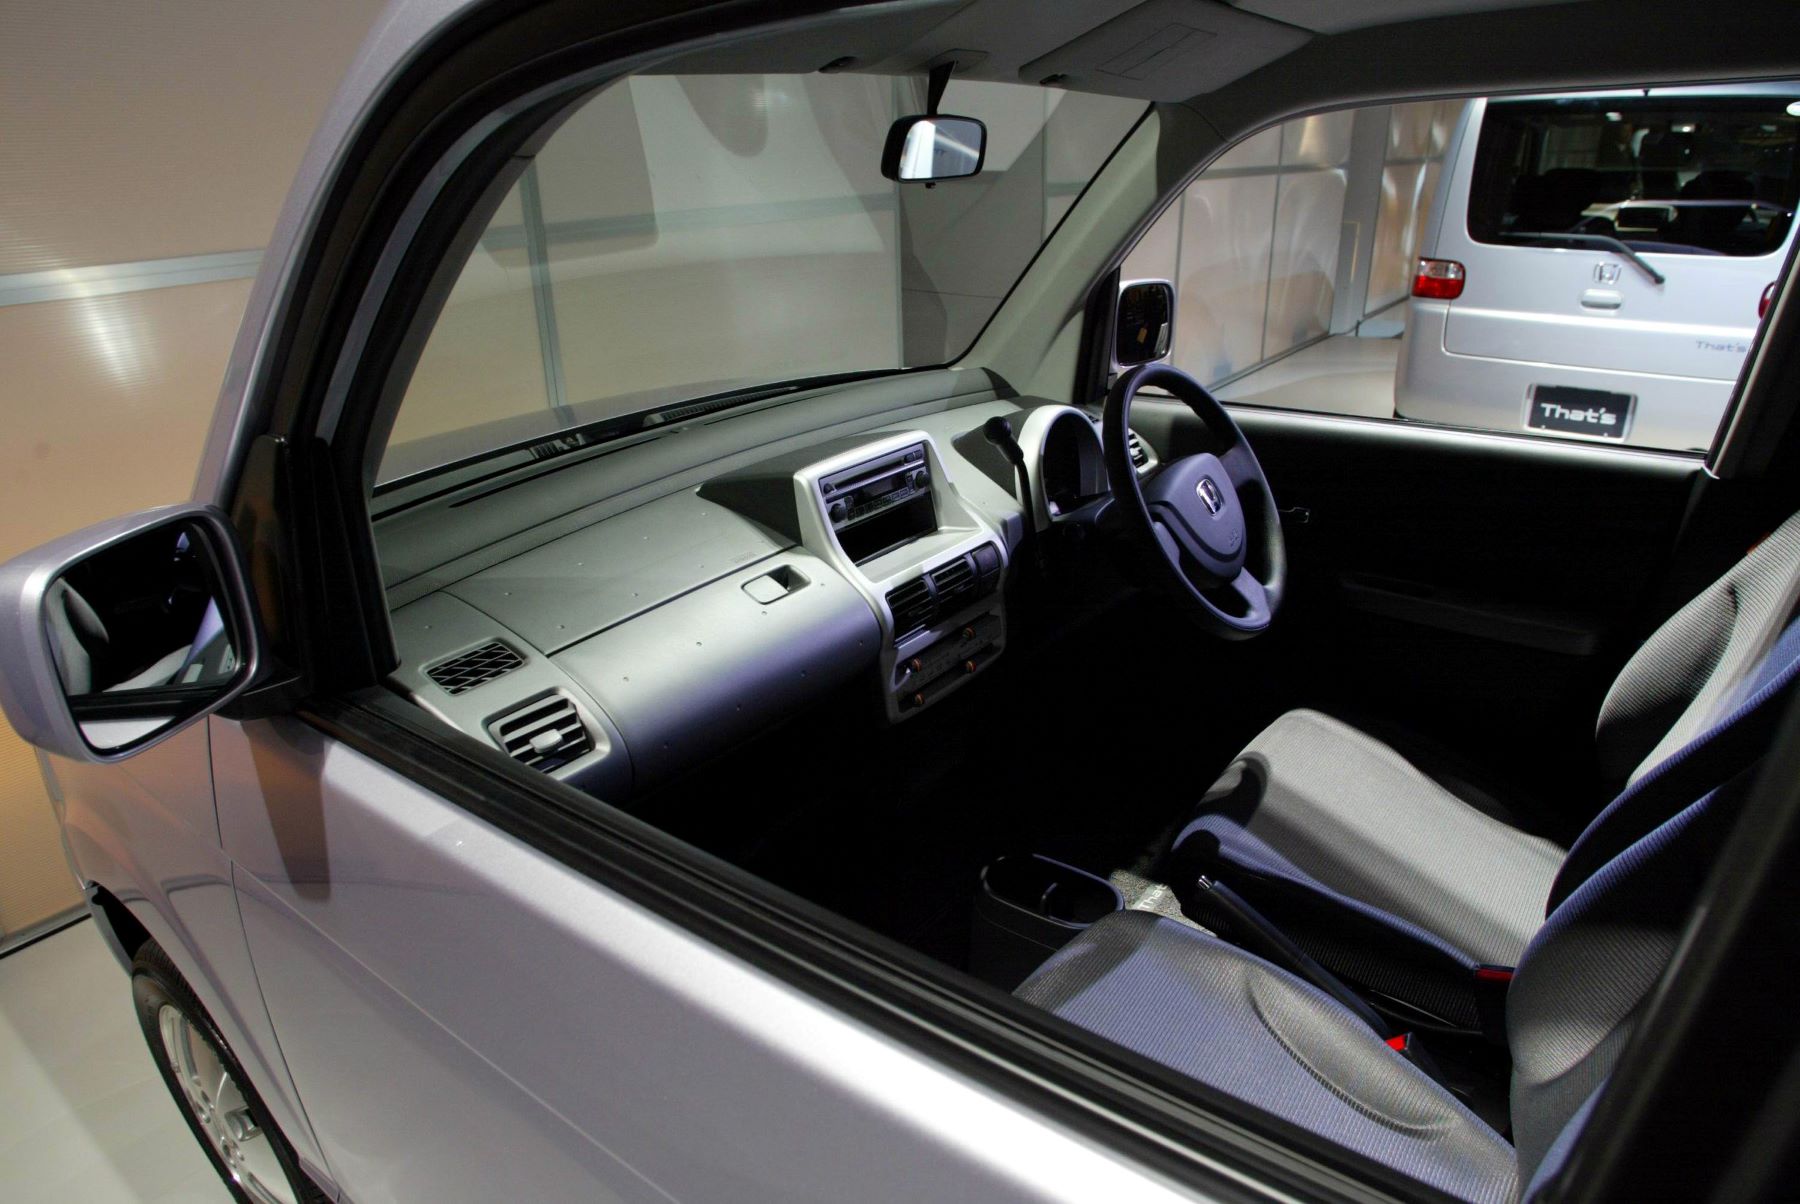 The interior of the Honda Thats, which features a right-side drivers seat for right-hand drive countries